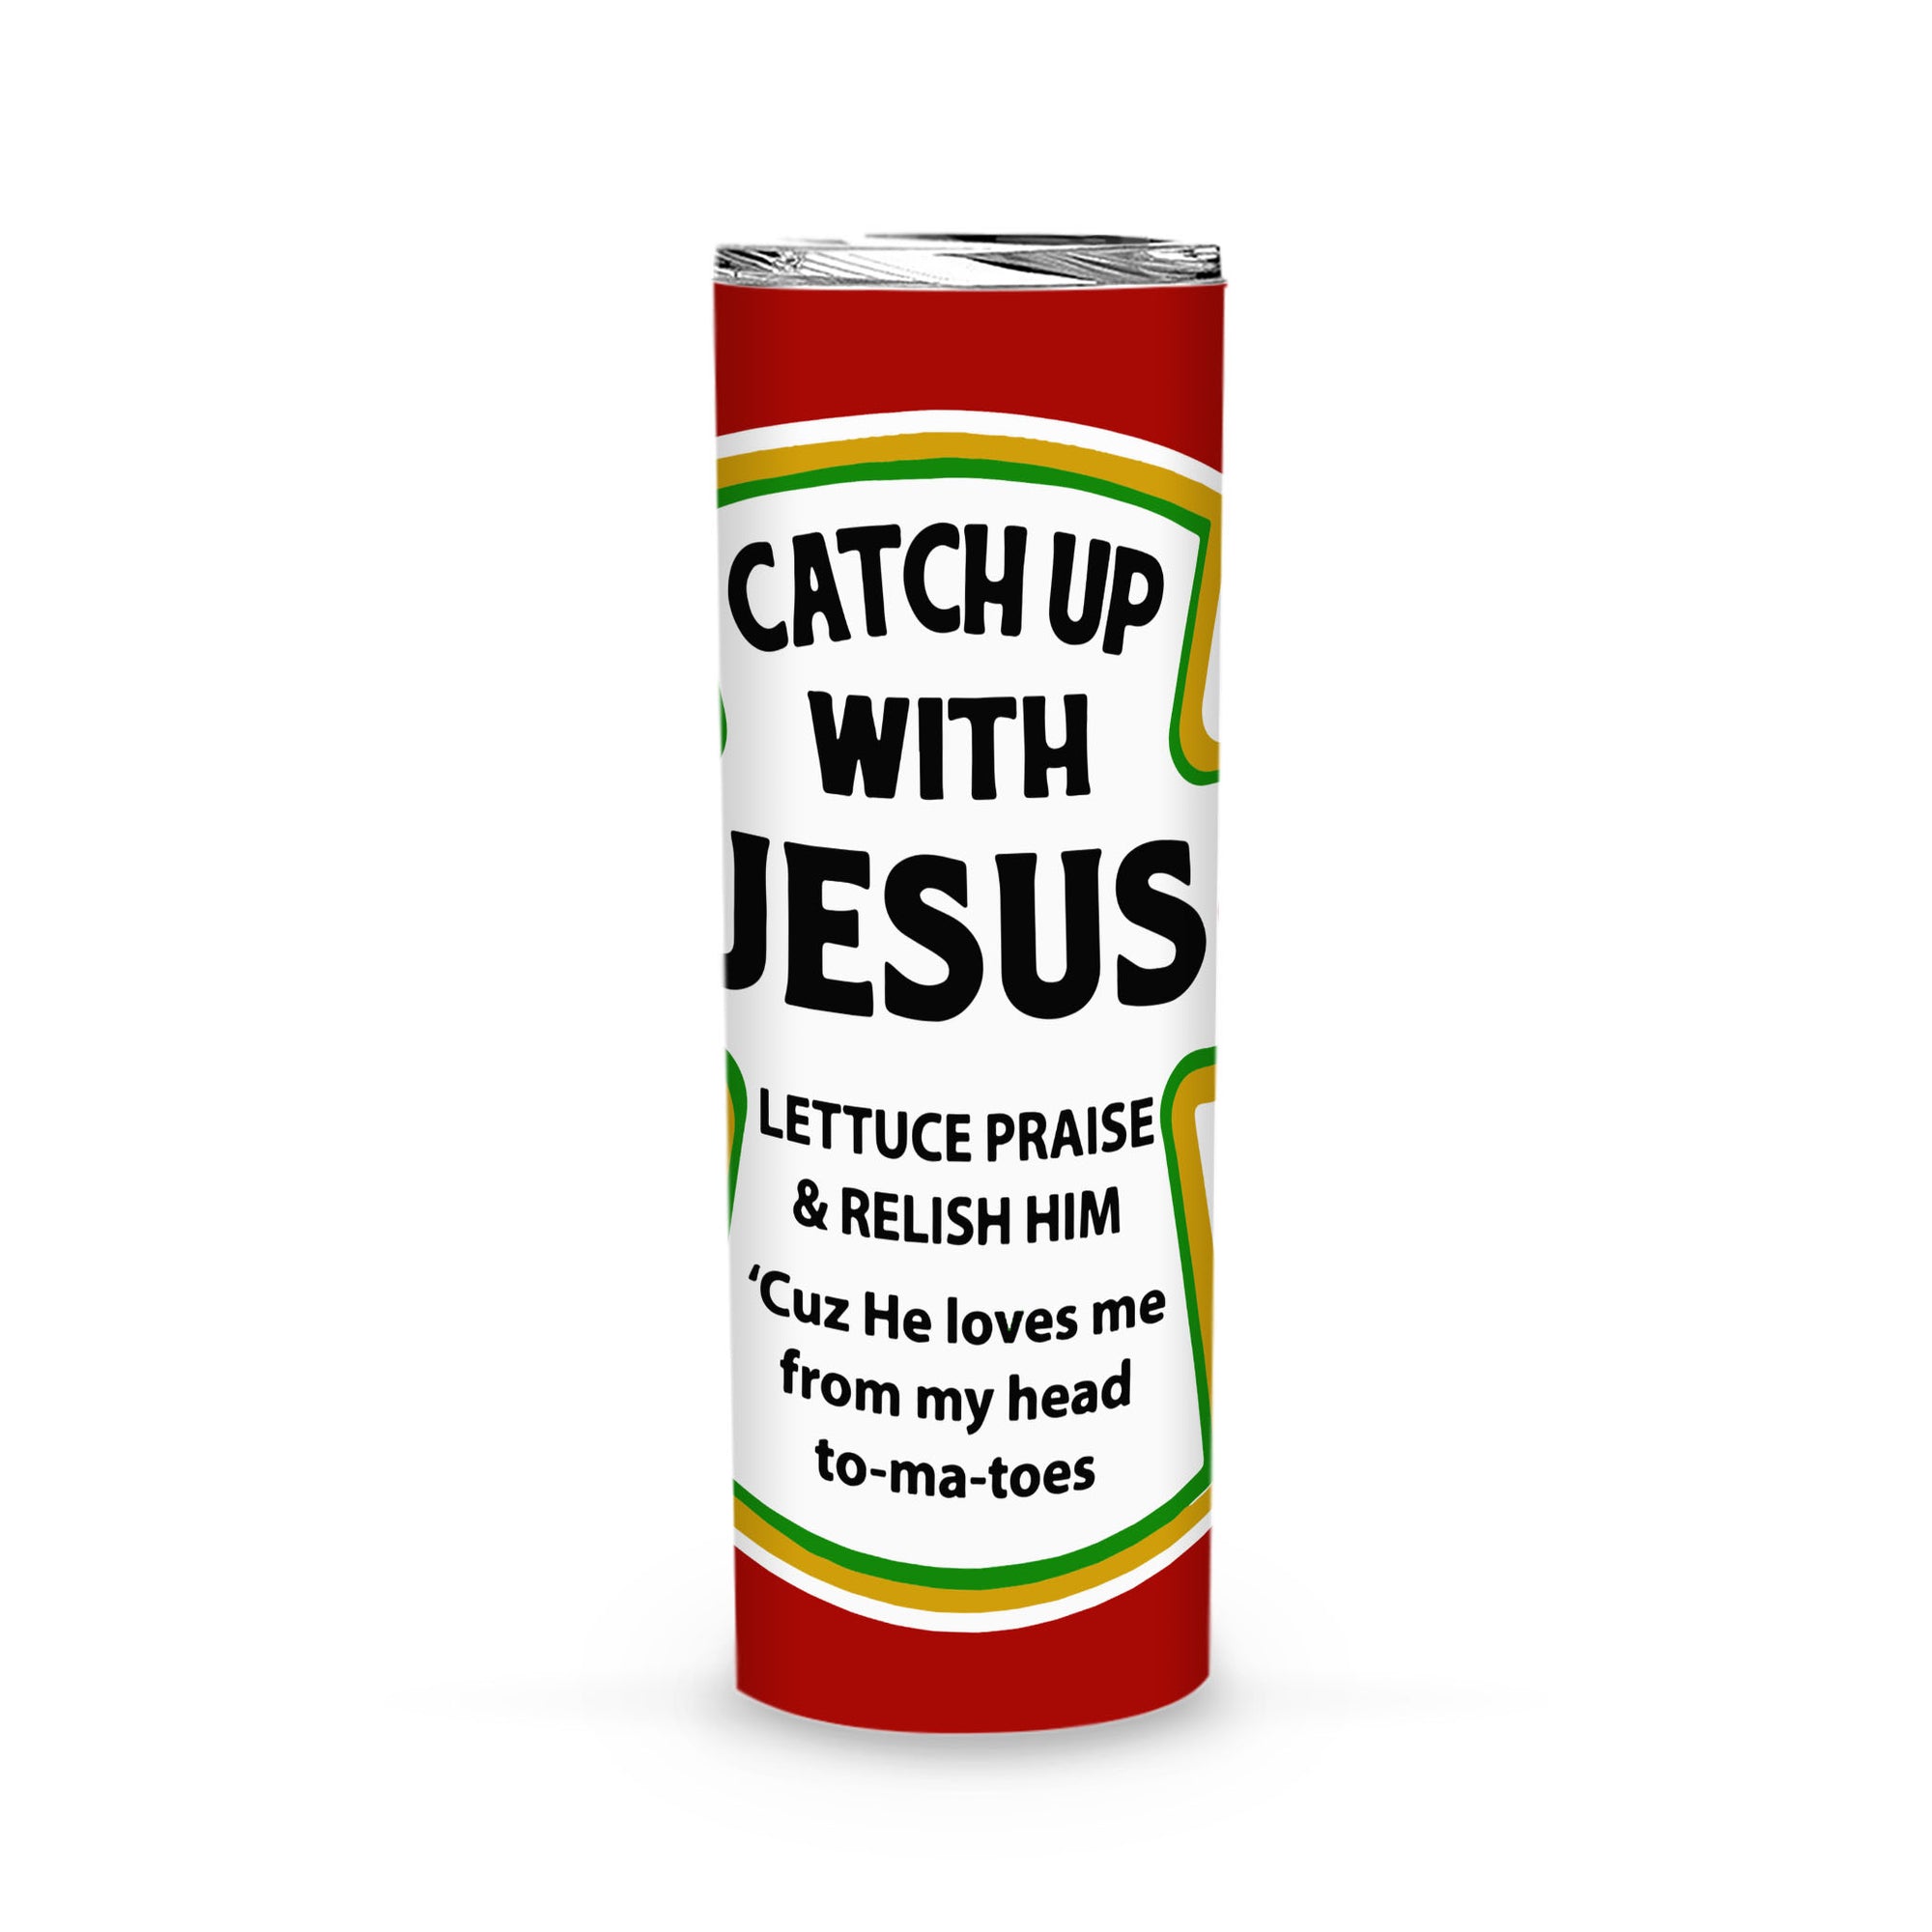 Catch up with Jesus lettuce praise and relish him cuz he loves Me from my head to ma toes Skinny Tumbler